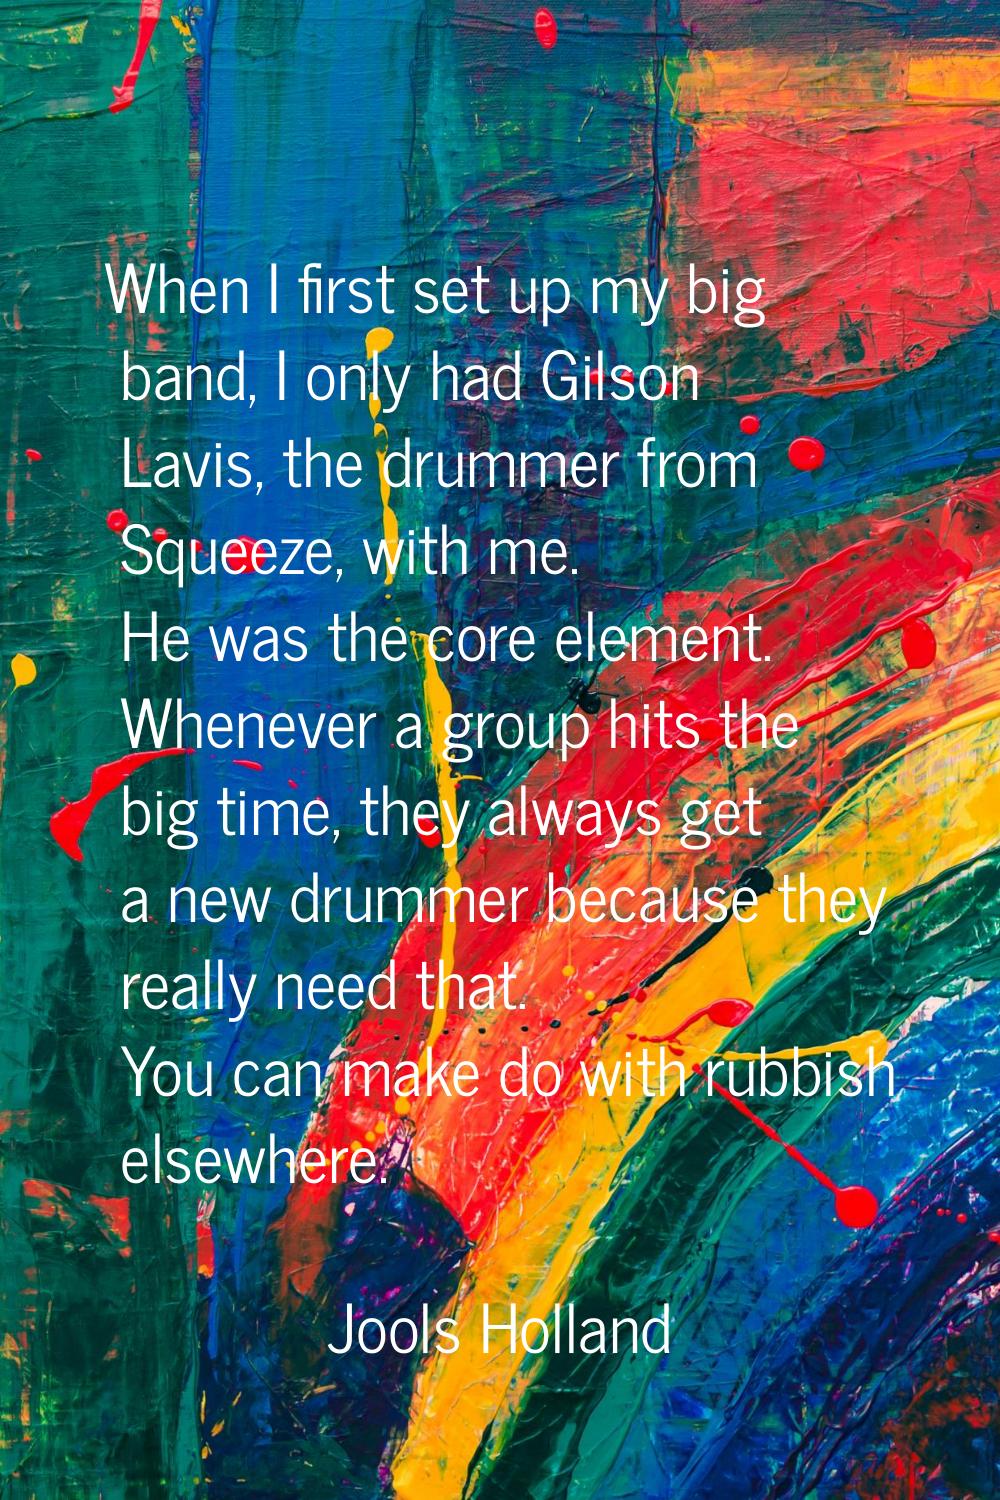 When I first set up my big band, I only had Gilson Lavis, the drummer from Squeeze, with me. He was